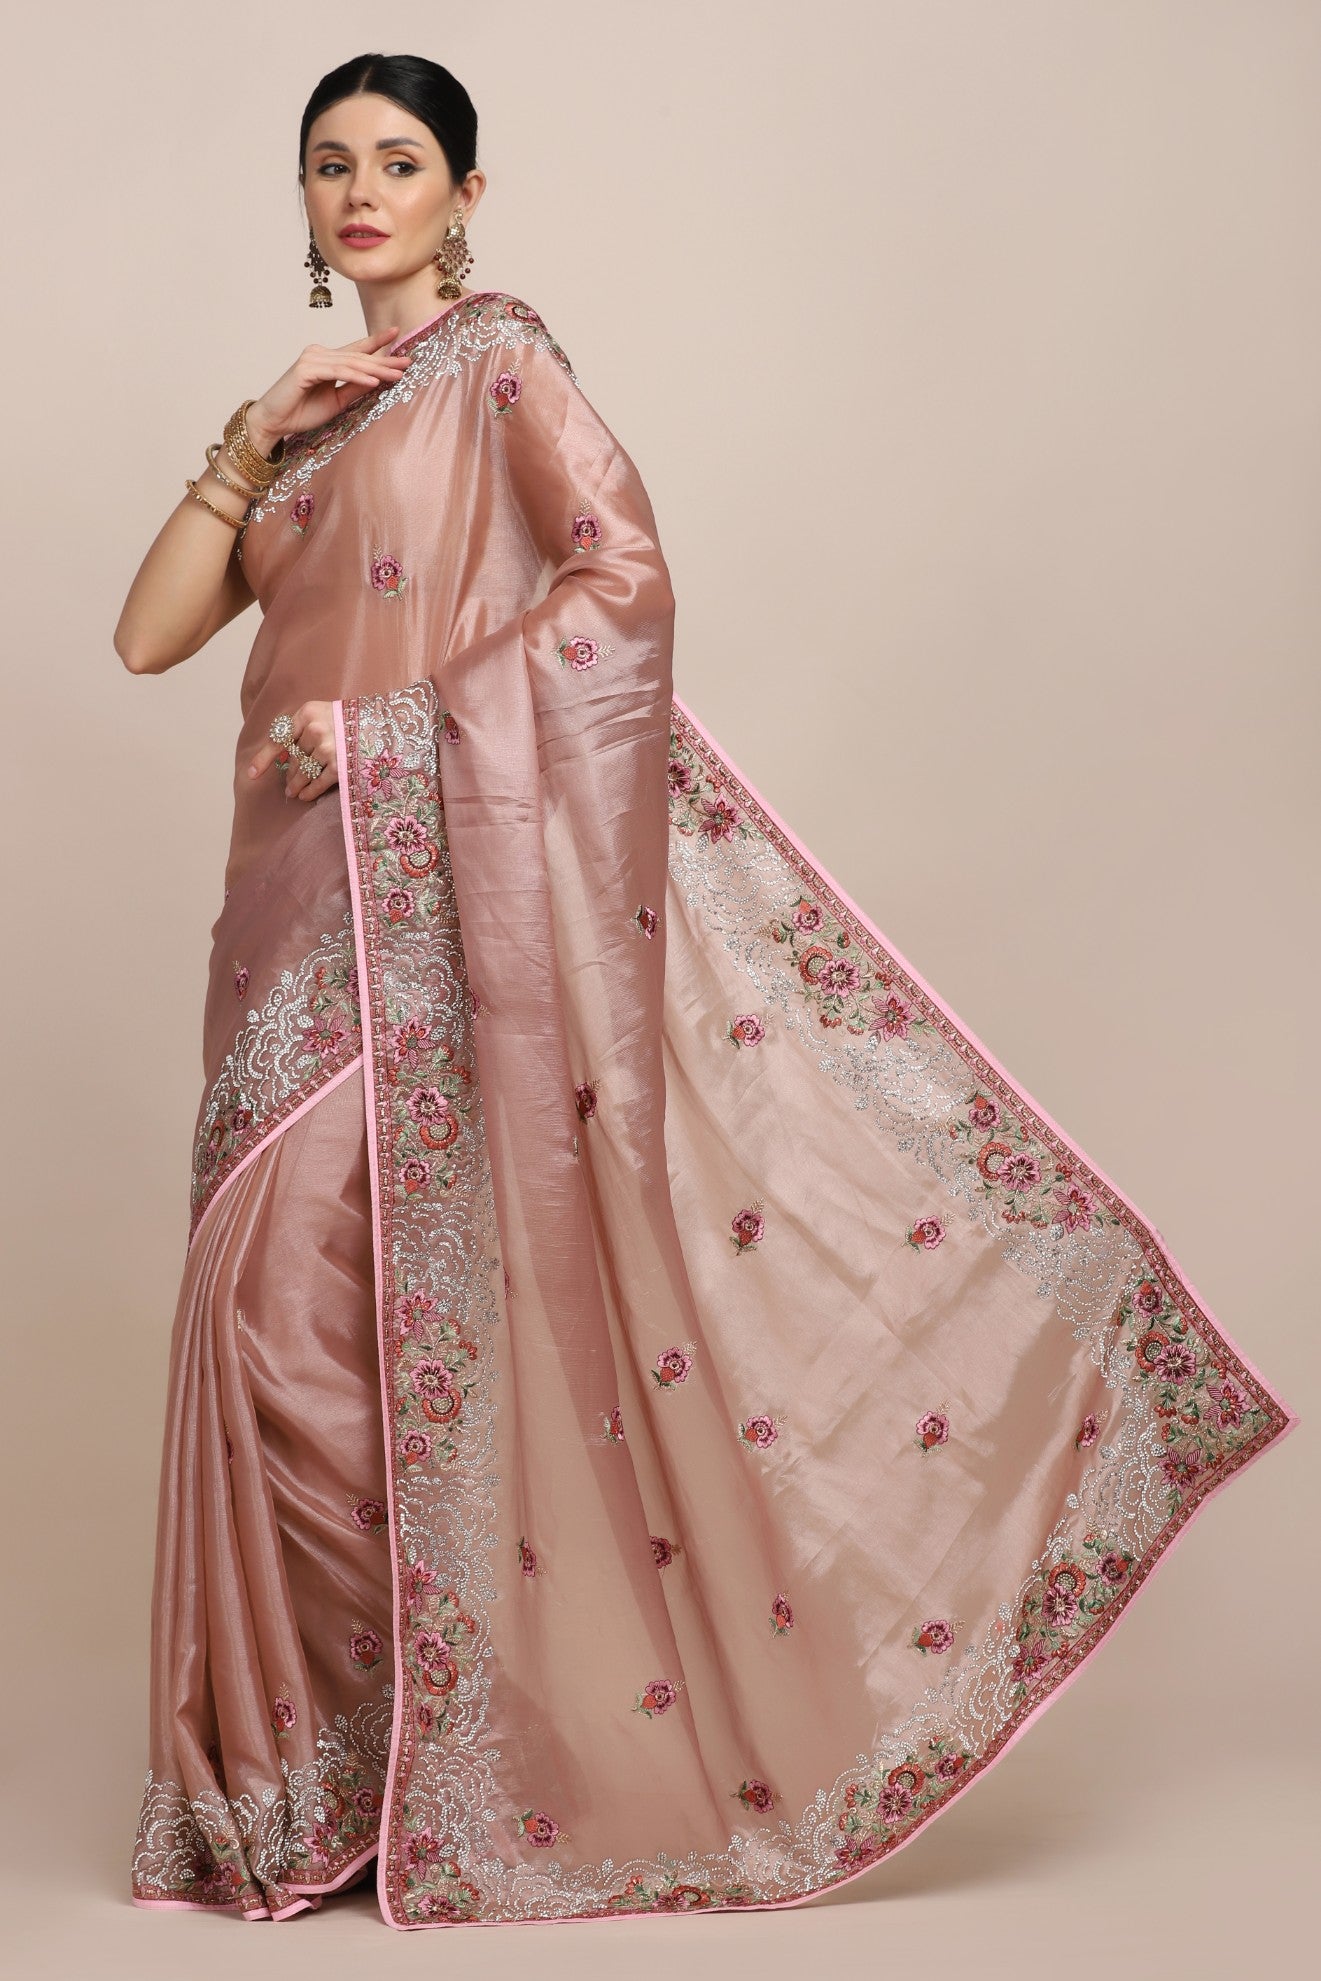 Model in Onion pink floral embroidered saree